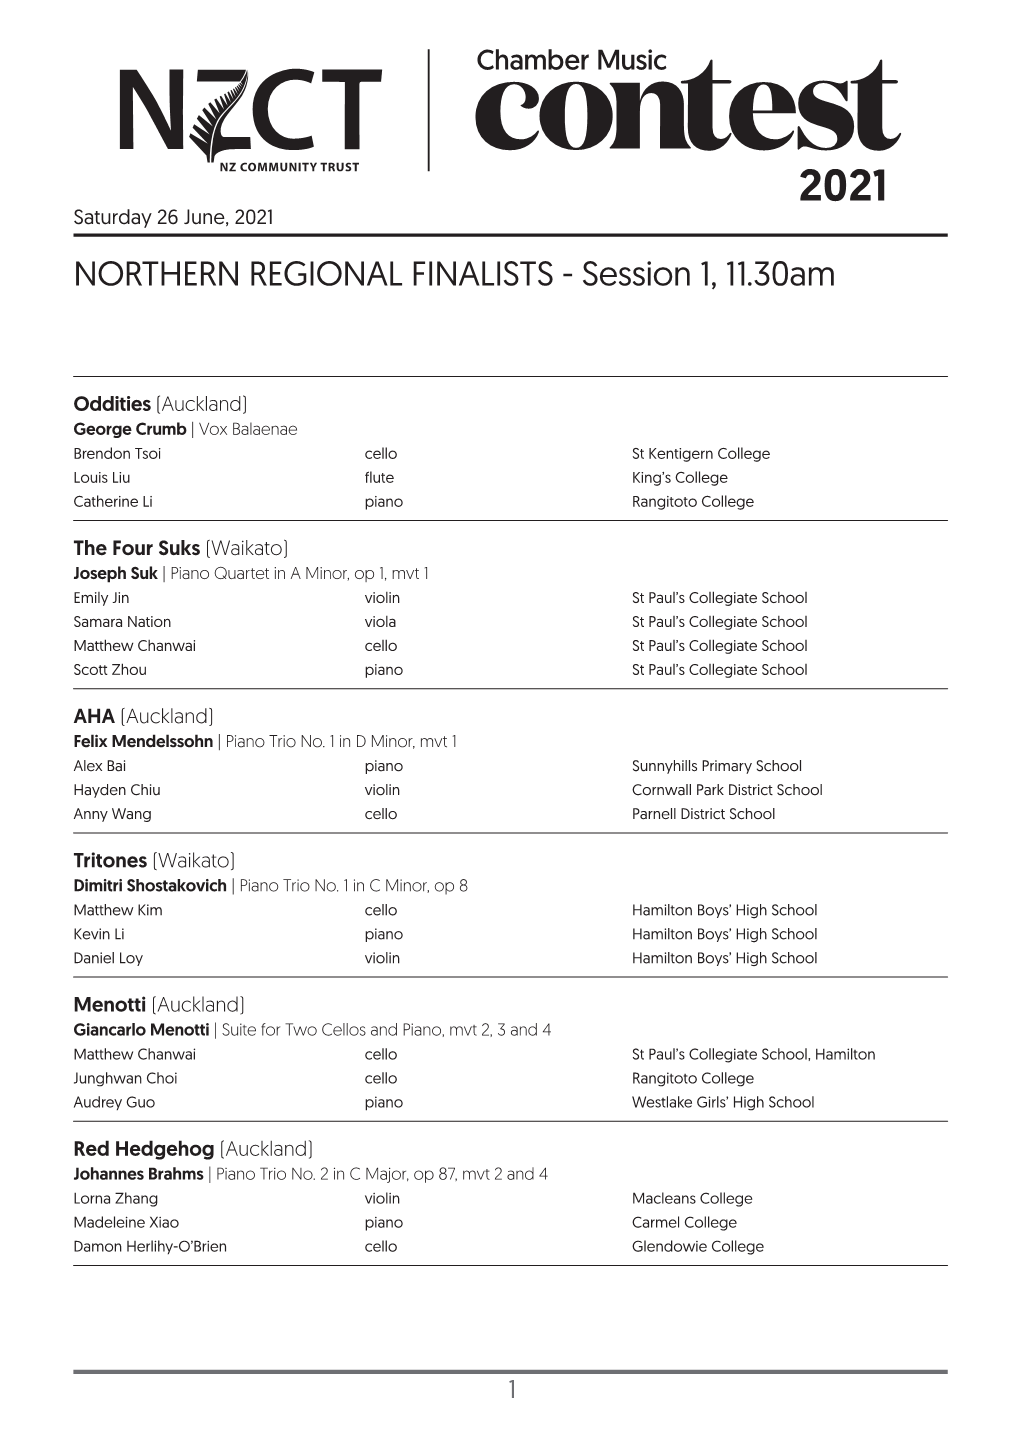 NORTHERN REGIONAL FINALISTS - Session 1, 11.30Am